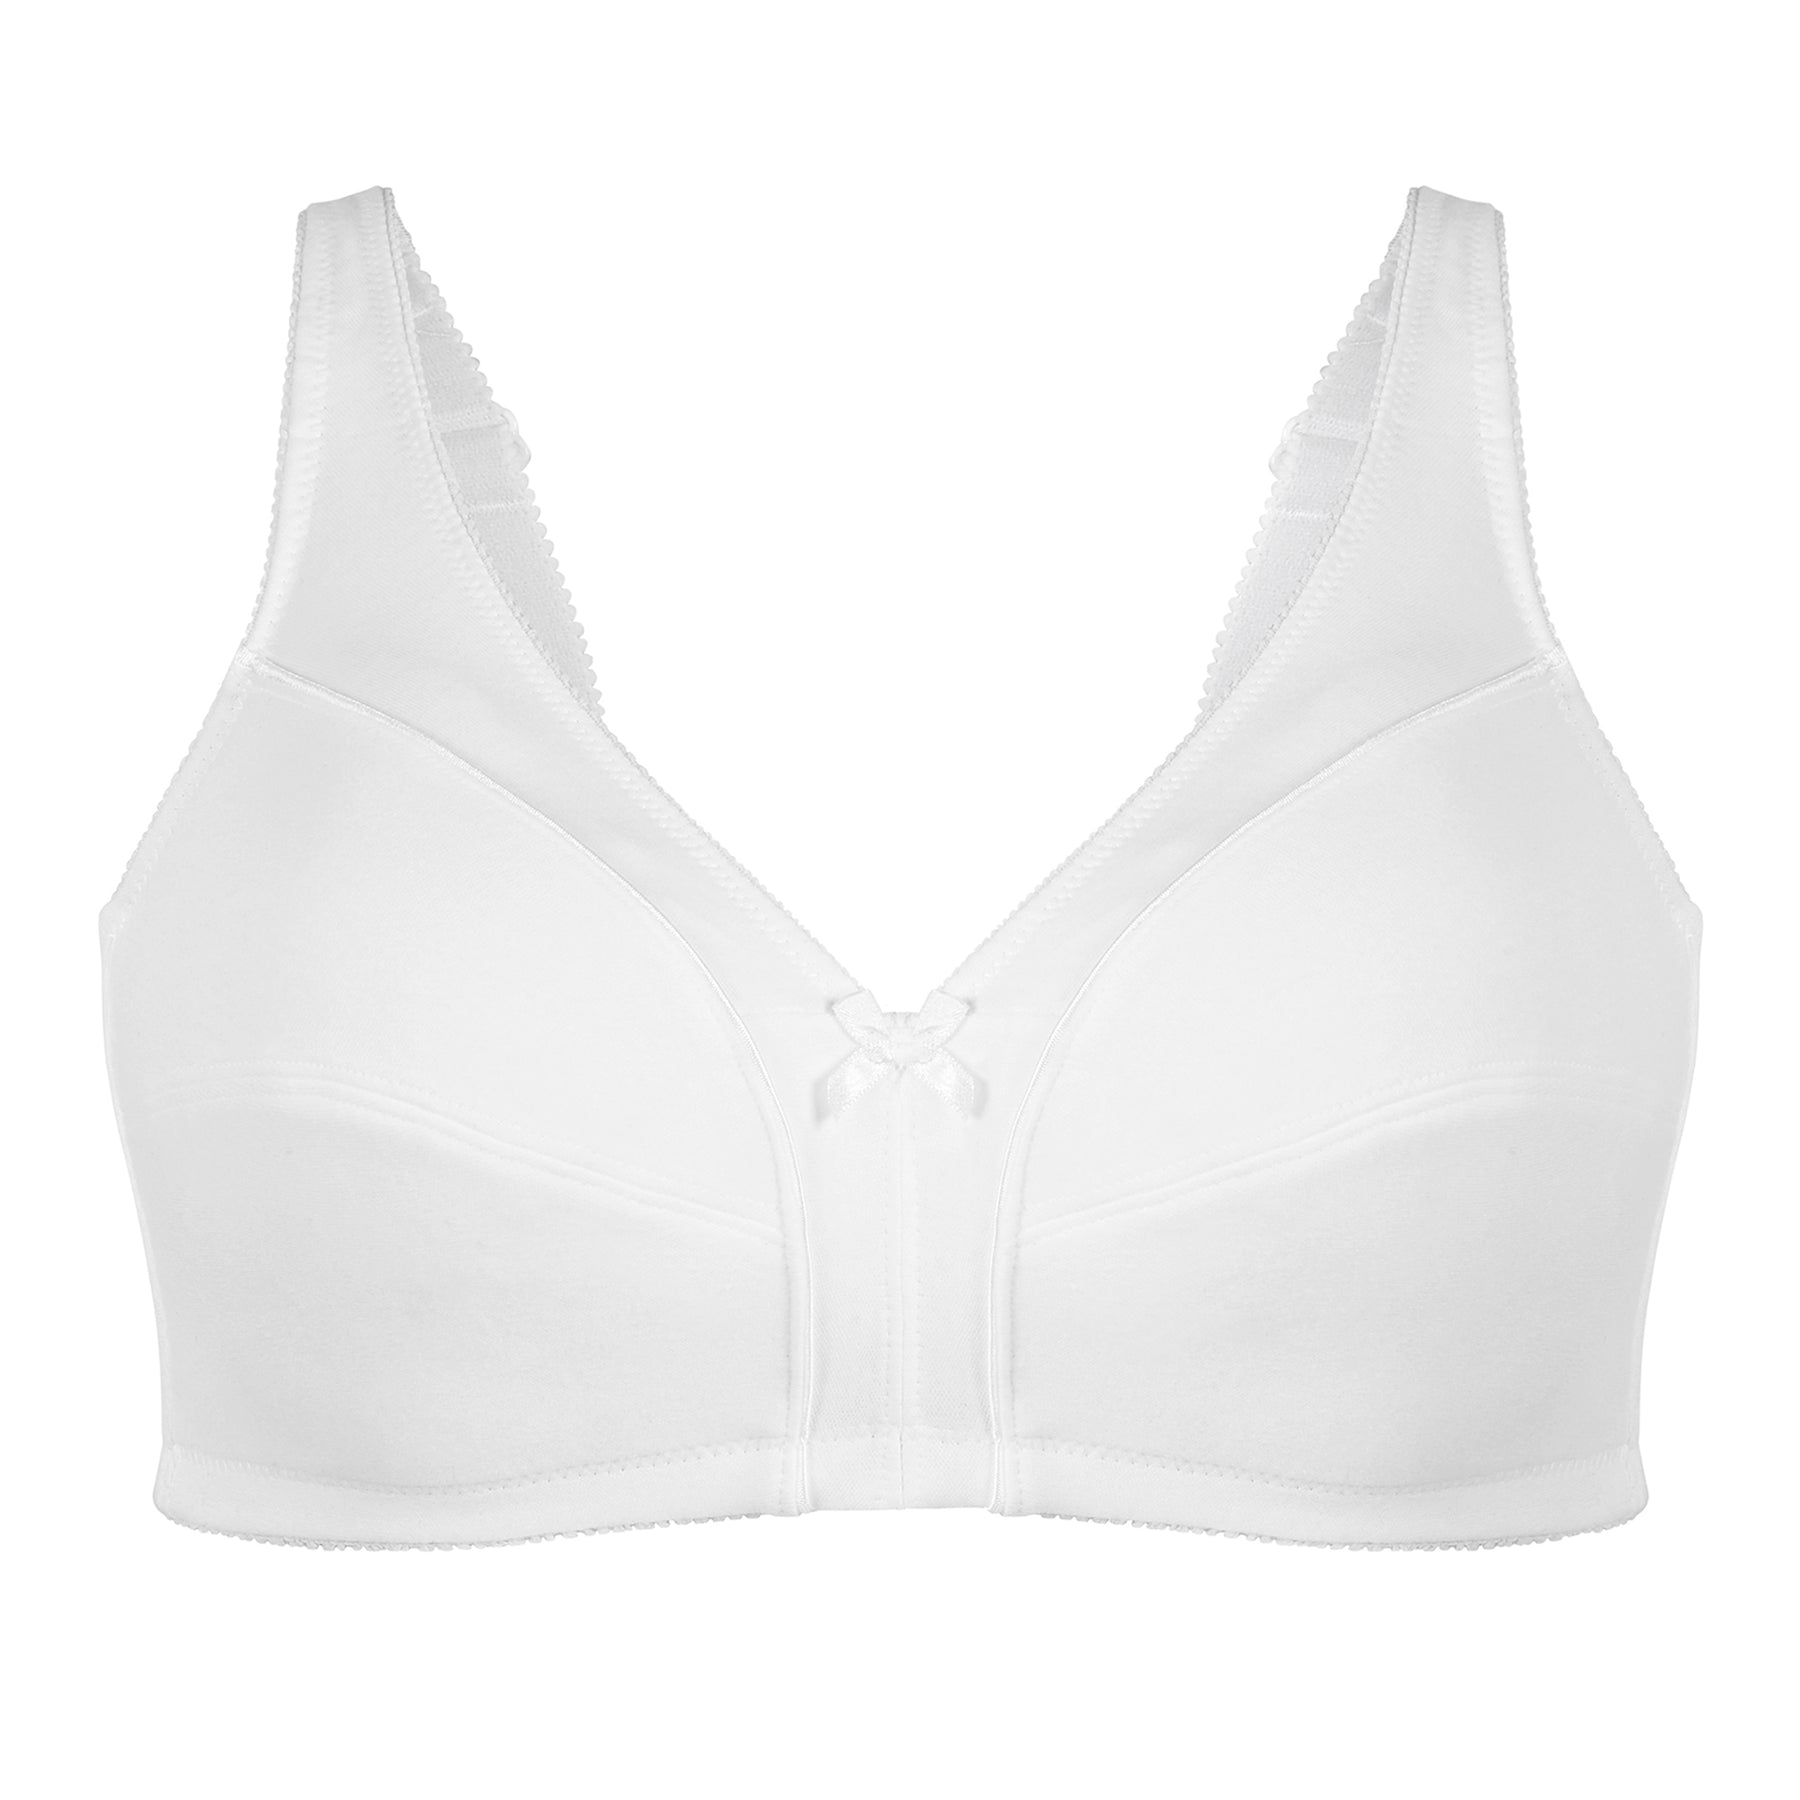 Wholesale c75 cup molded plain seamless bra For Supportive Underwear 